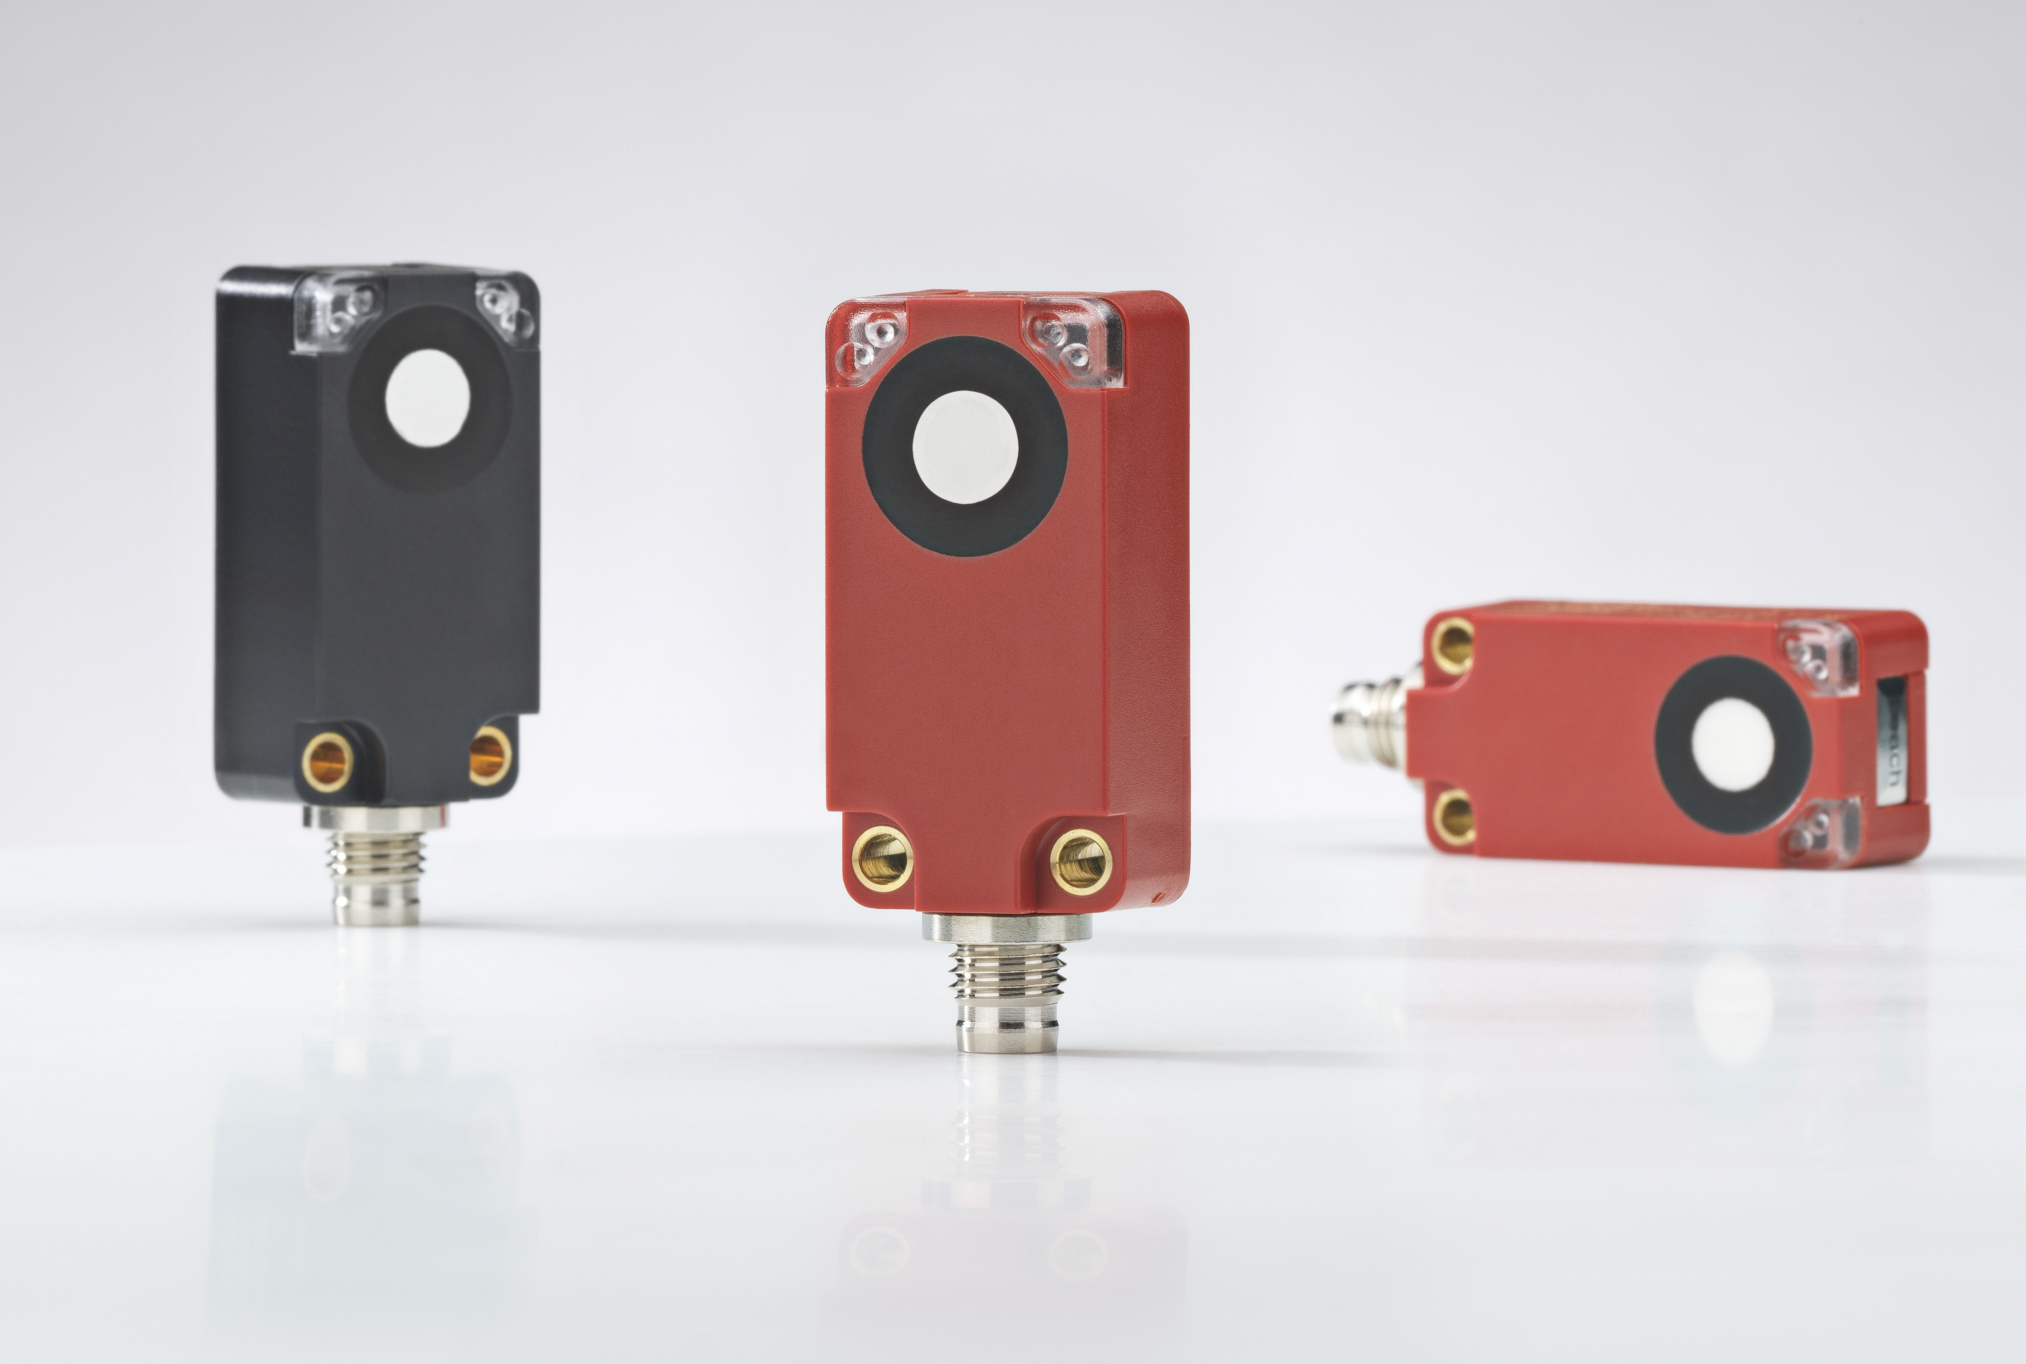 New ultrasonic sensors from Leuze can be used for many different applications.